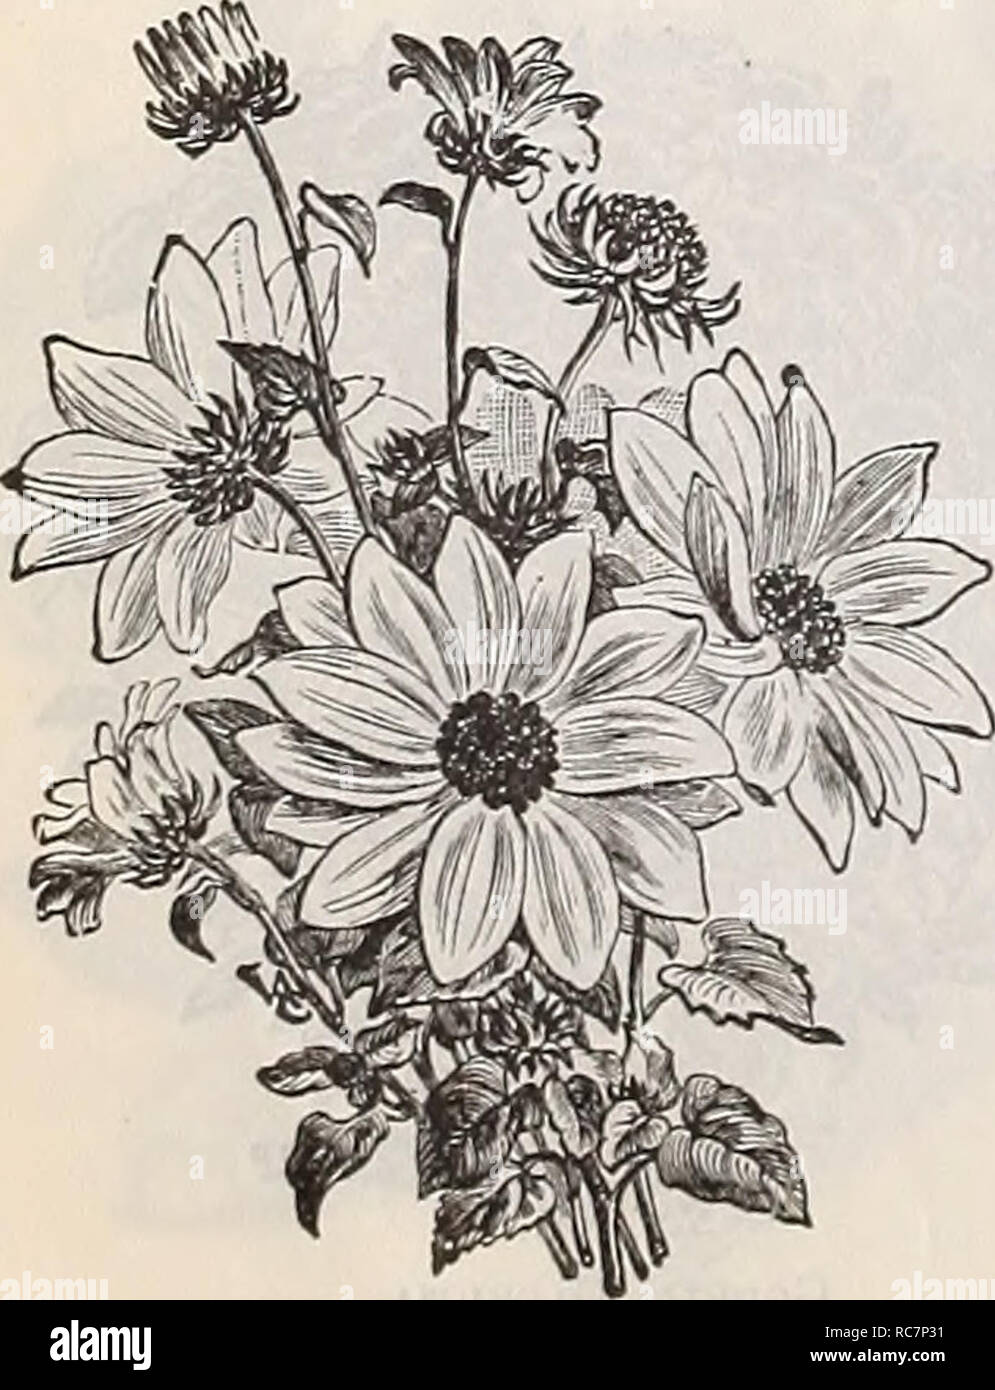 . Dreer's garden calendar : 1898. Seeds Catalogs; Nursery stock Catalogs; Gardening Catalogs; Flowers Seeds Catalogs; Vegetables Seeds Catalogs. 5802 Eulalia Jap. Varieg'ata. Striped white and green . 5988 Lag-urUS OvatuS [H^ires Tail Grass). Beauti- ful small white heads or spikes of bloom, excellent for bouquets ; annual; 1 foot &amp; 6263 Peunisetum Ruppeliammi. Beautiful and graceful spikes of purple ; whether for border decora- tion or for bouquets this is one of the. best; 2 J feet. 10 6556 Setaria Mag'ua {Brislty Fox-tail Grass). A handsome grass, growing 10 to 12 feet high, bearing den Stock Photo